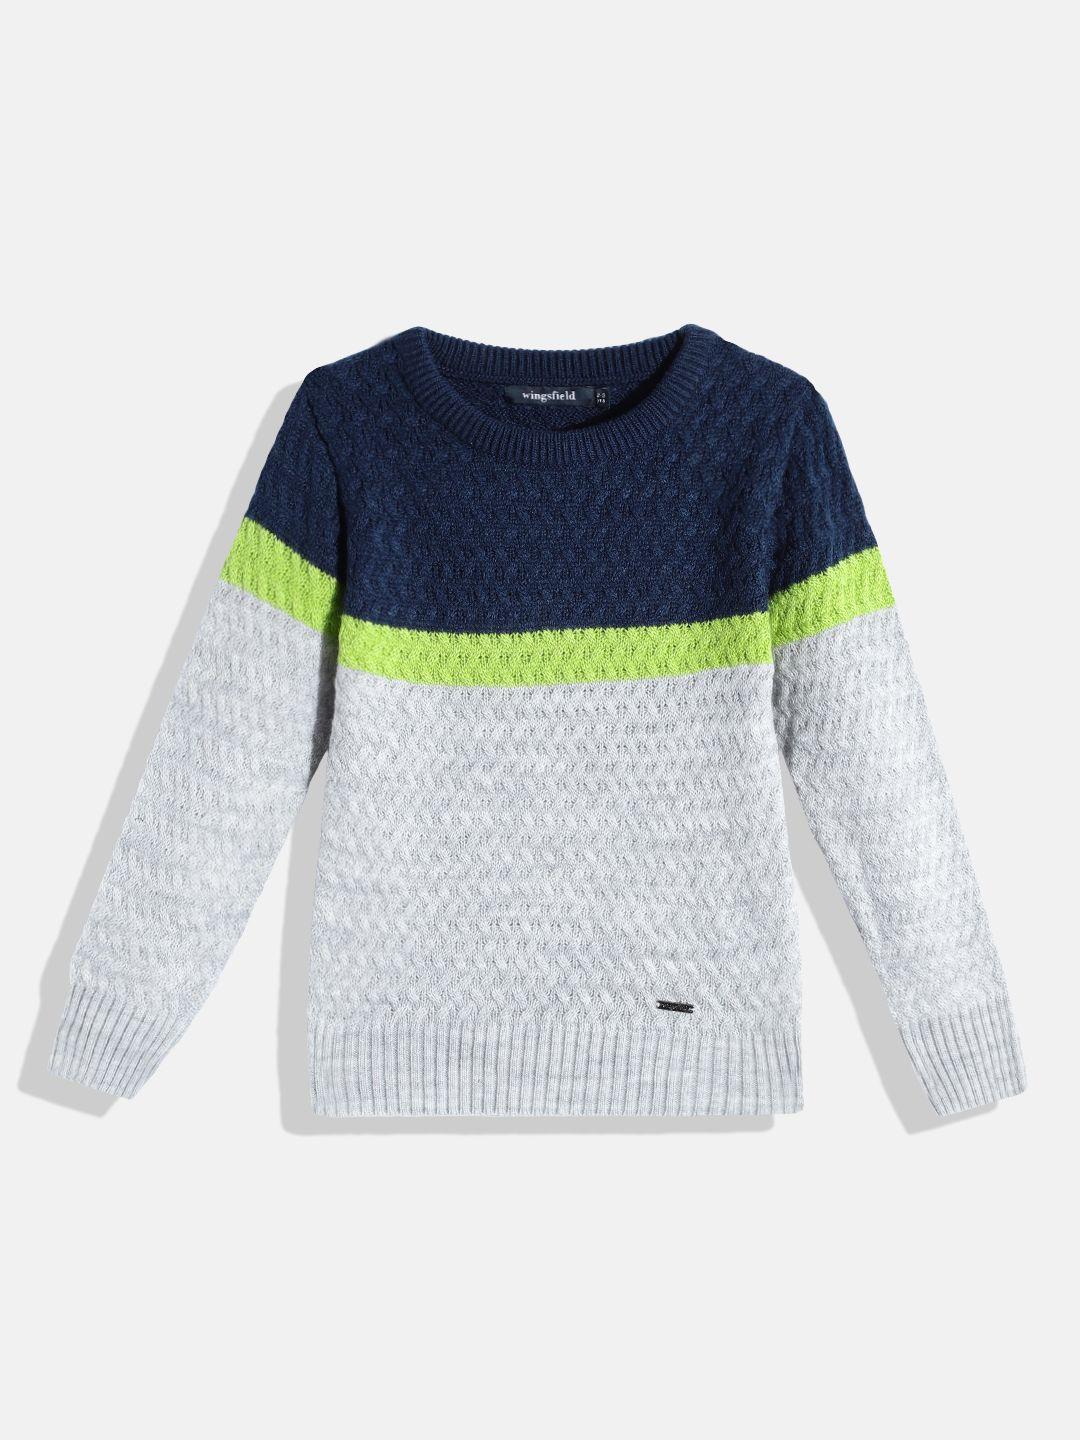 wingsfield boys grey & blue cable knit acrylic pullover